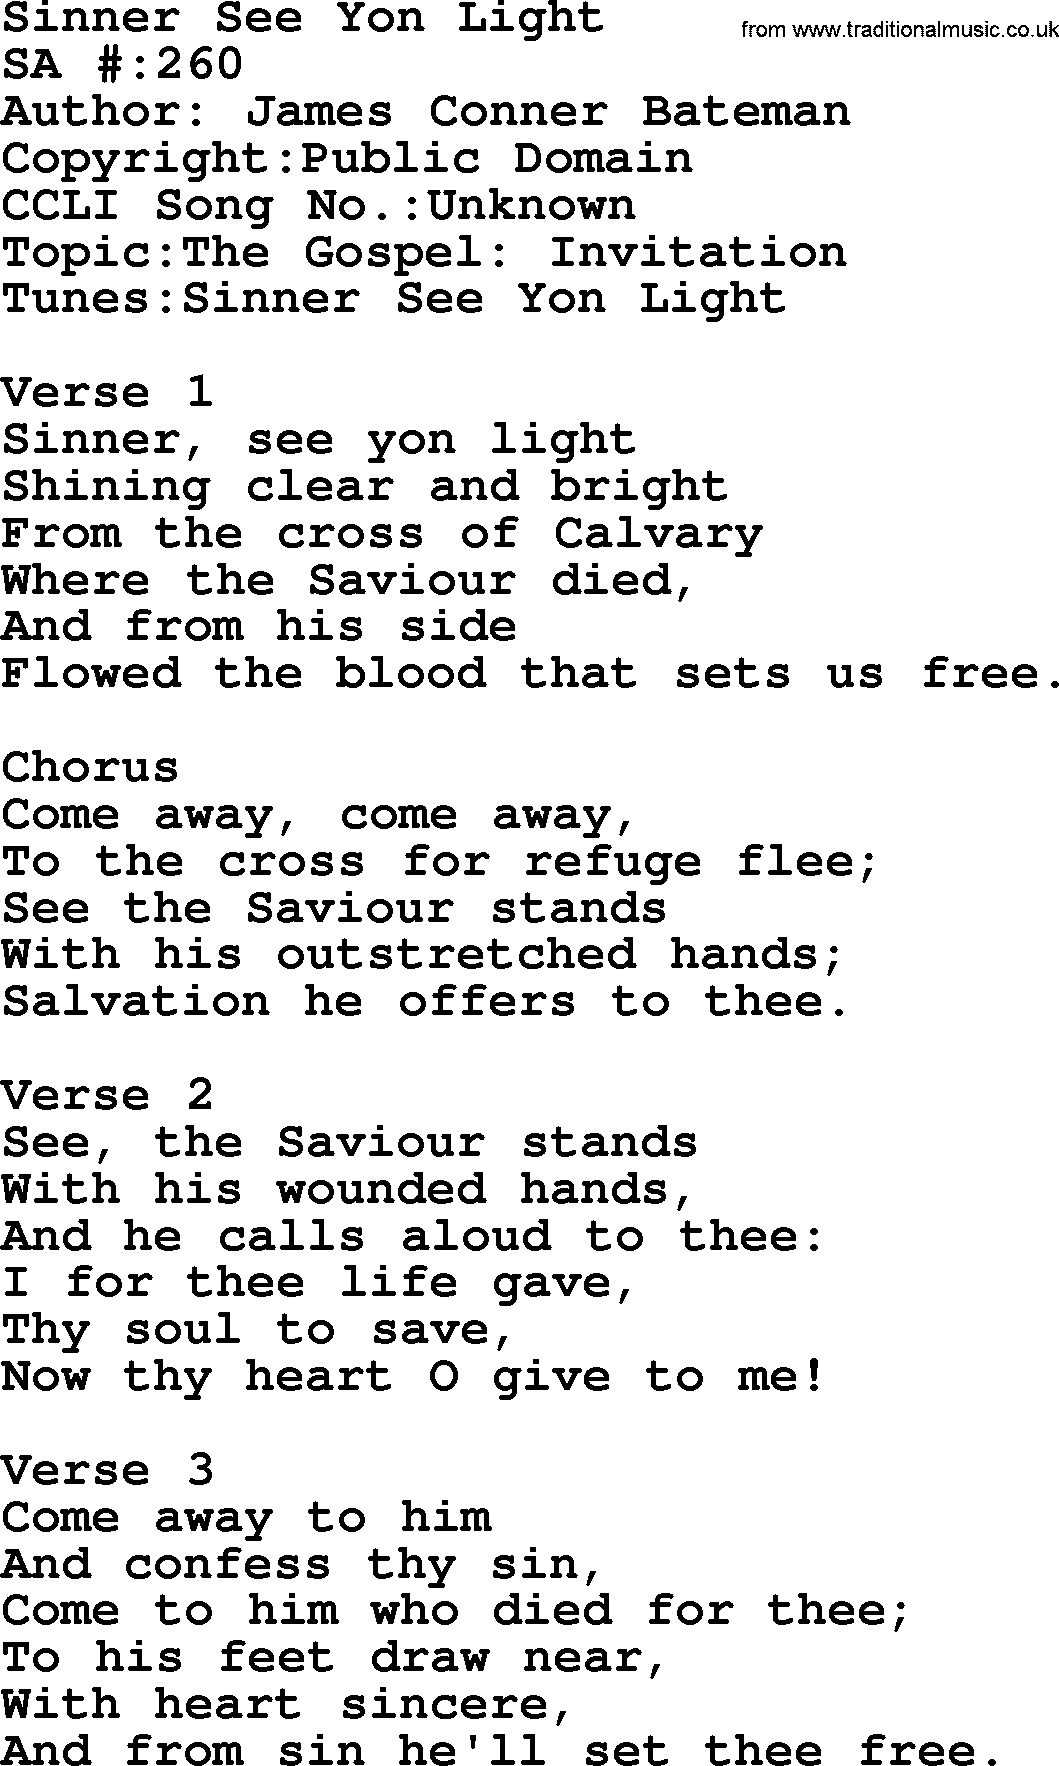 Salvation Army Hymnal, title: Sinner See Yon Light, with lyrics and PDF,